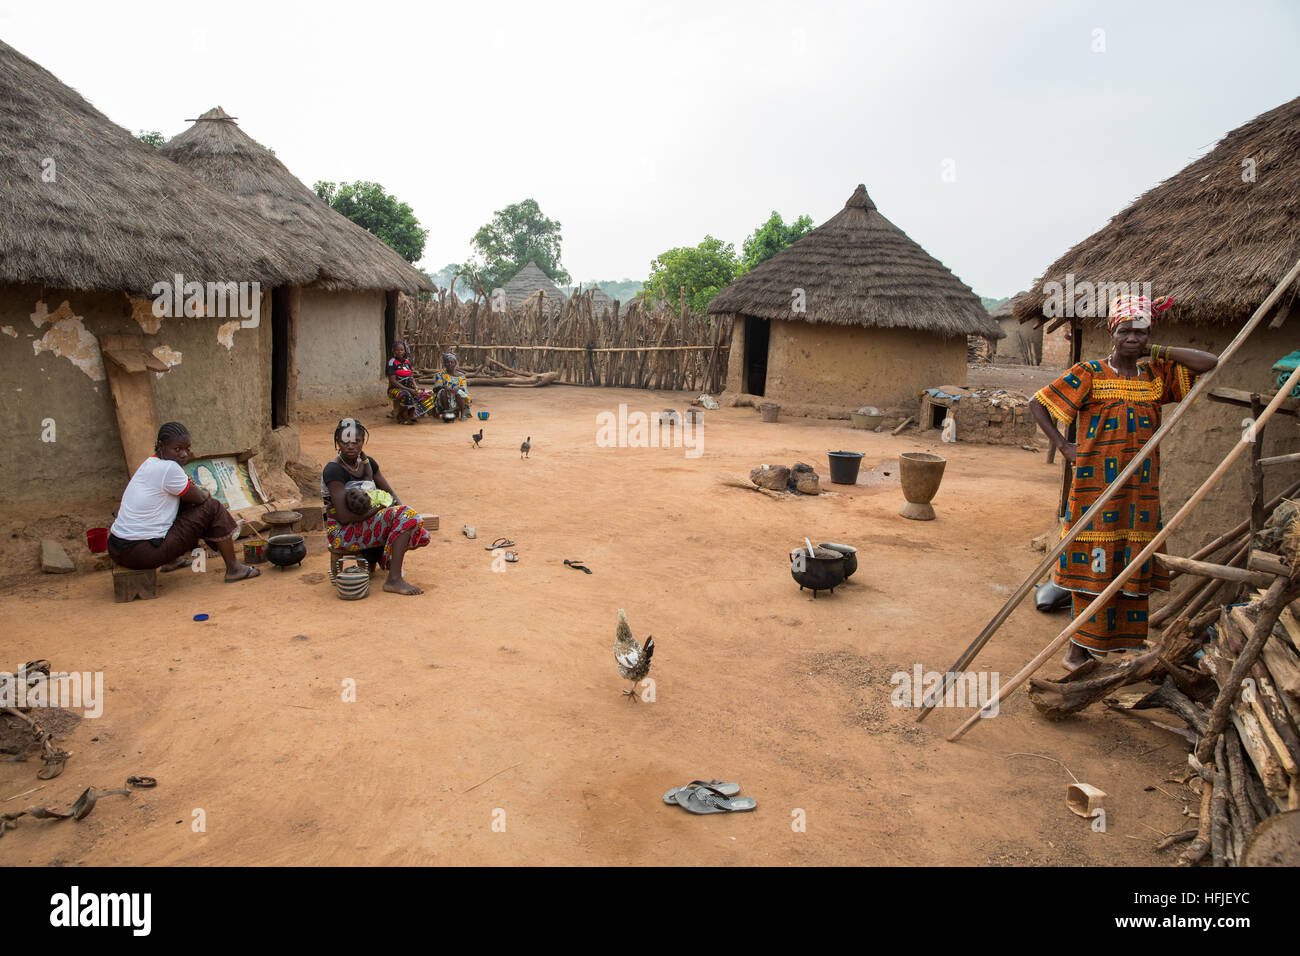 Koumban village, Guinea, 2nd May 2015; Daily life in the early morning in a compound with several wives. Stock Photo